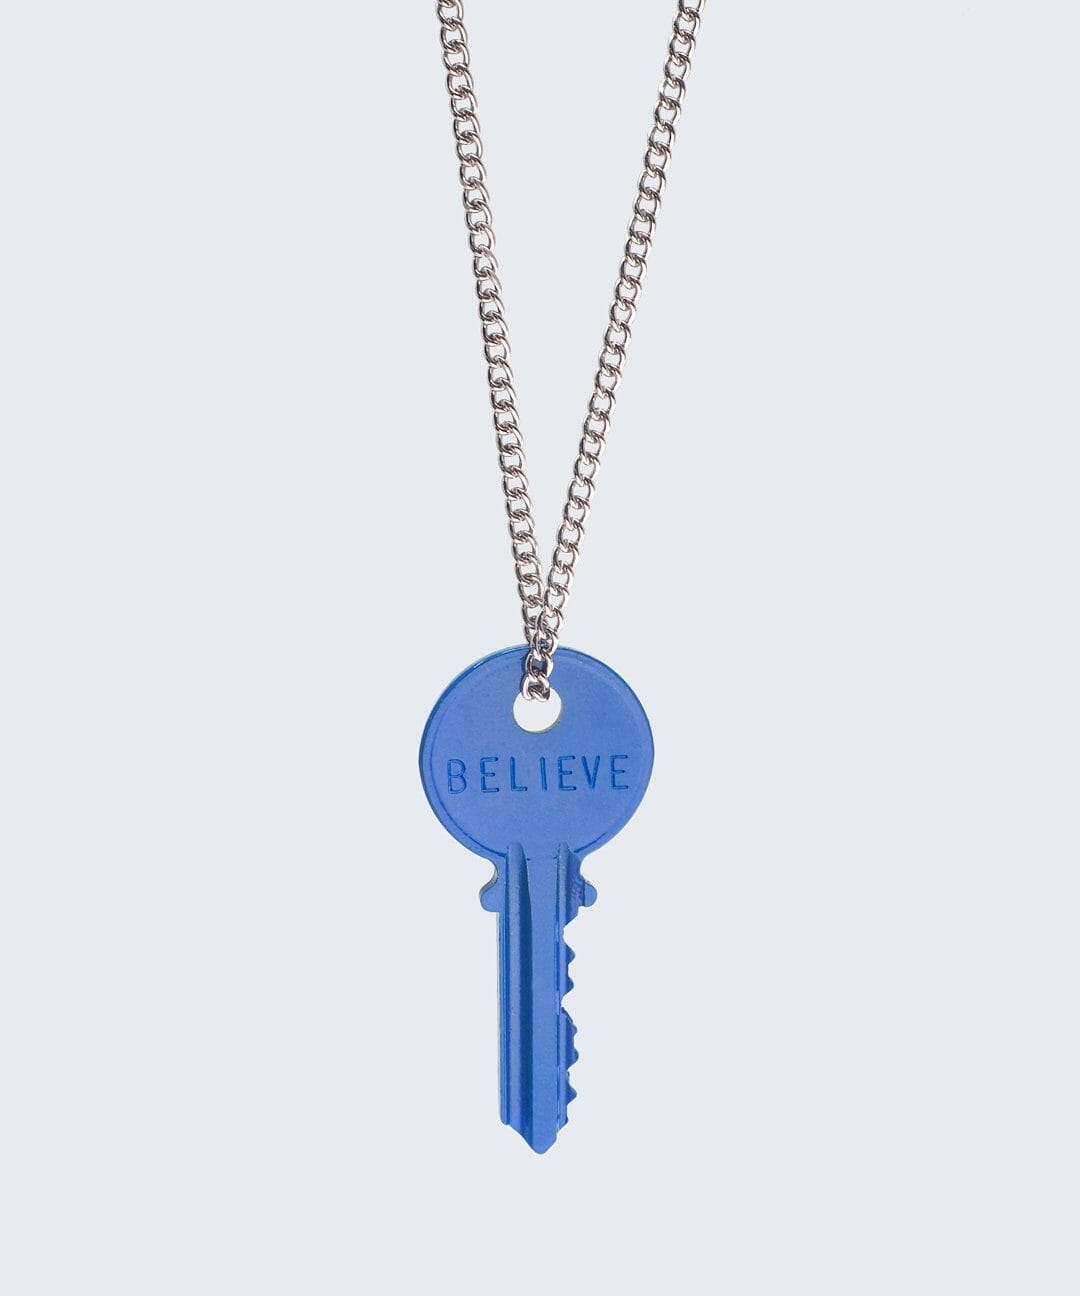 N - Royal Blue Classic Ball Chain Key Necklace Necklaces The Giving Keys 